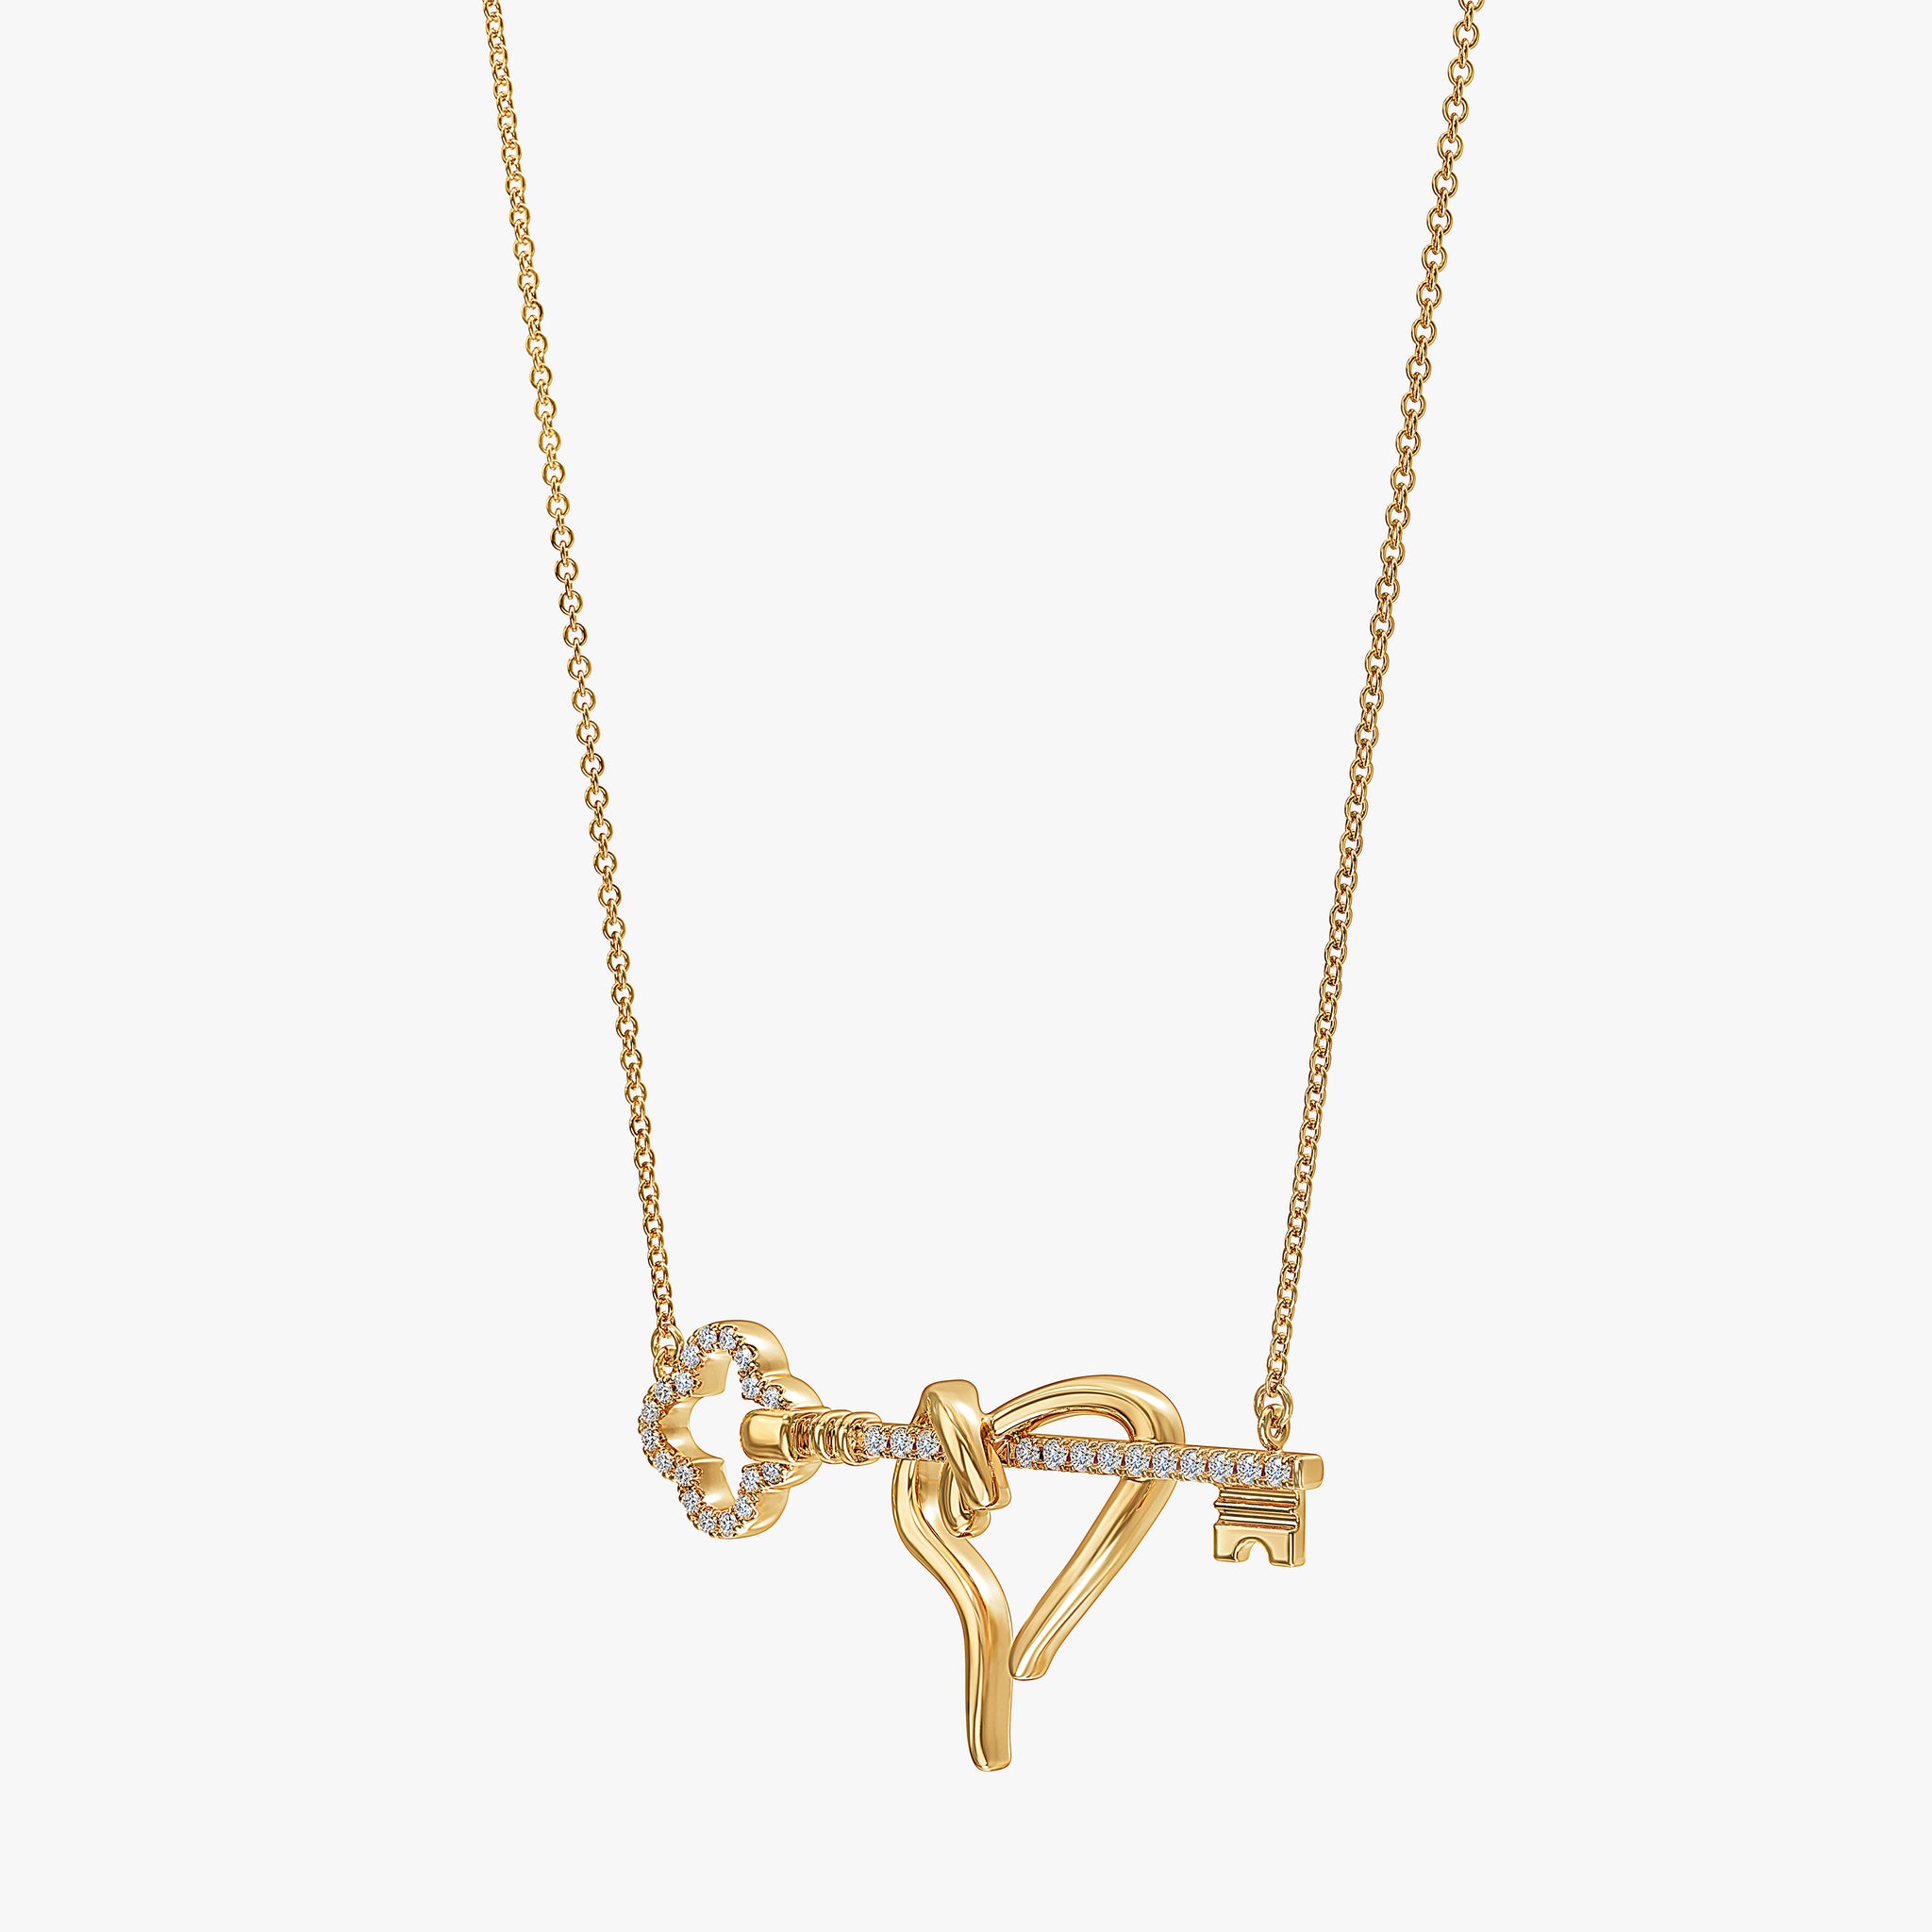 J'EVAR 14KT Yellow Gold Clover Heart & Key ALTR Lab Grown Diamond Necklace Perspective View